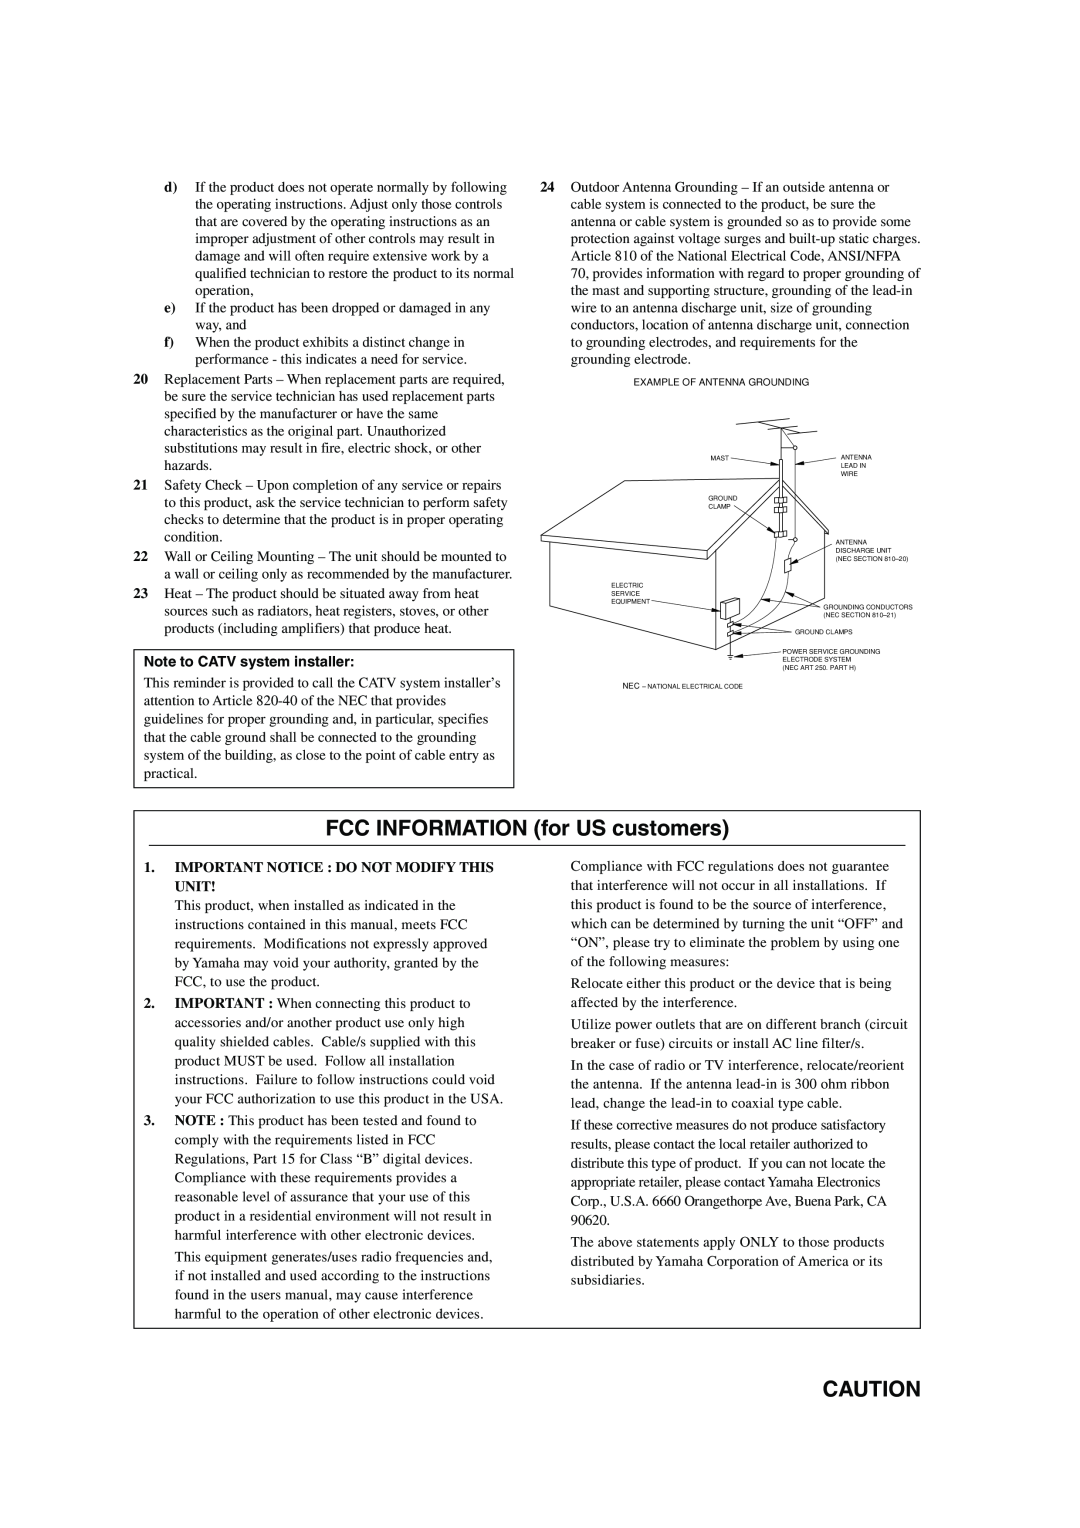 Yamaha HOMETHEATER SOUND SYSTEM, AVX-S80 owner manual FCC INFORMATION for US customers, Note to CATV system installer 